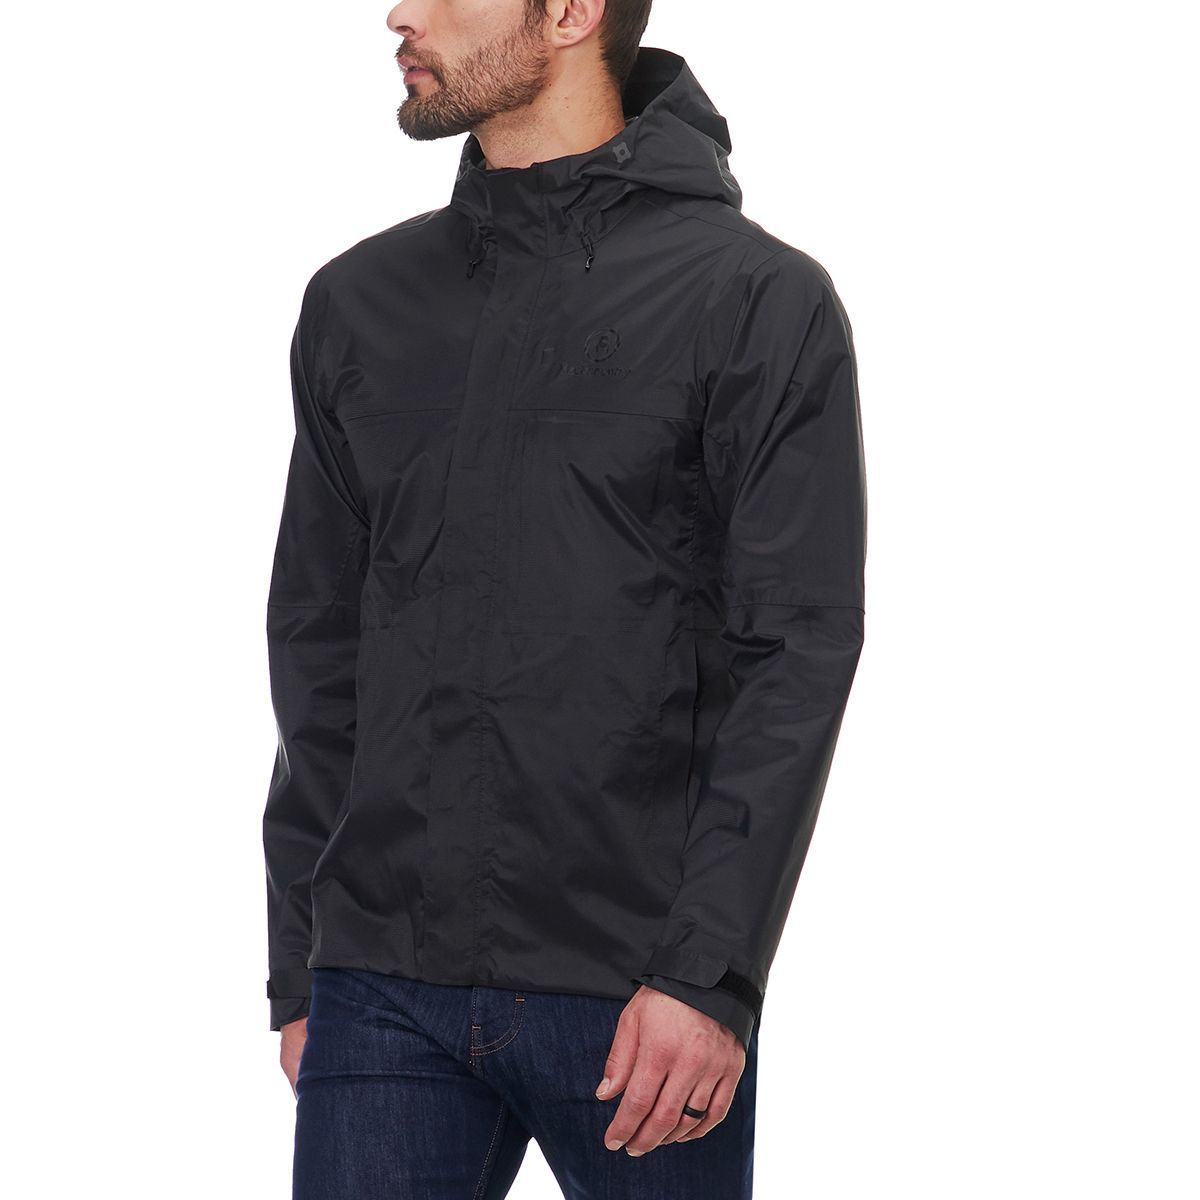 Backcountry Trail Weight Rain Jacket - Men's - Clothing